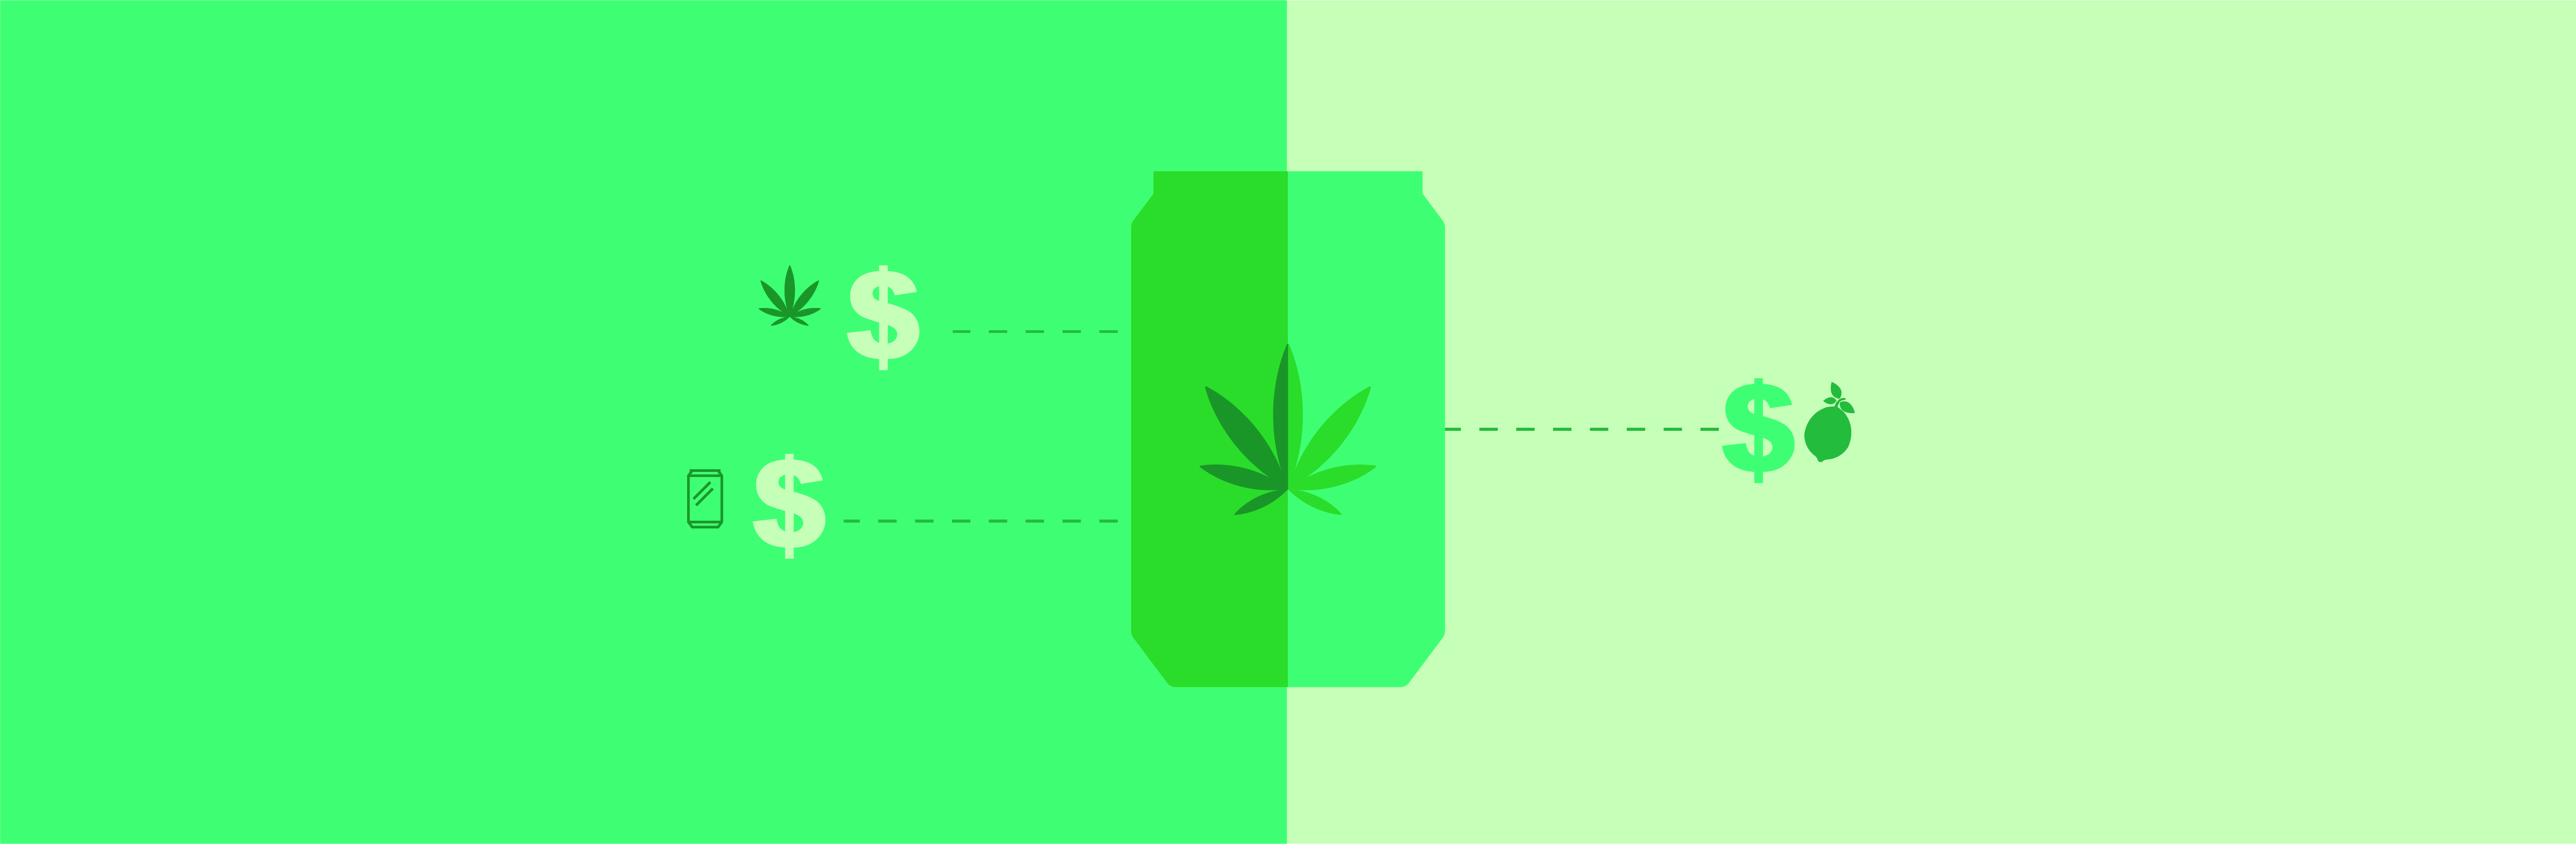 Smarter Material Cost Tracking for Cannabis and Nutraceutical Companies